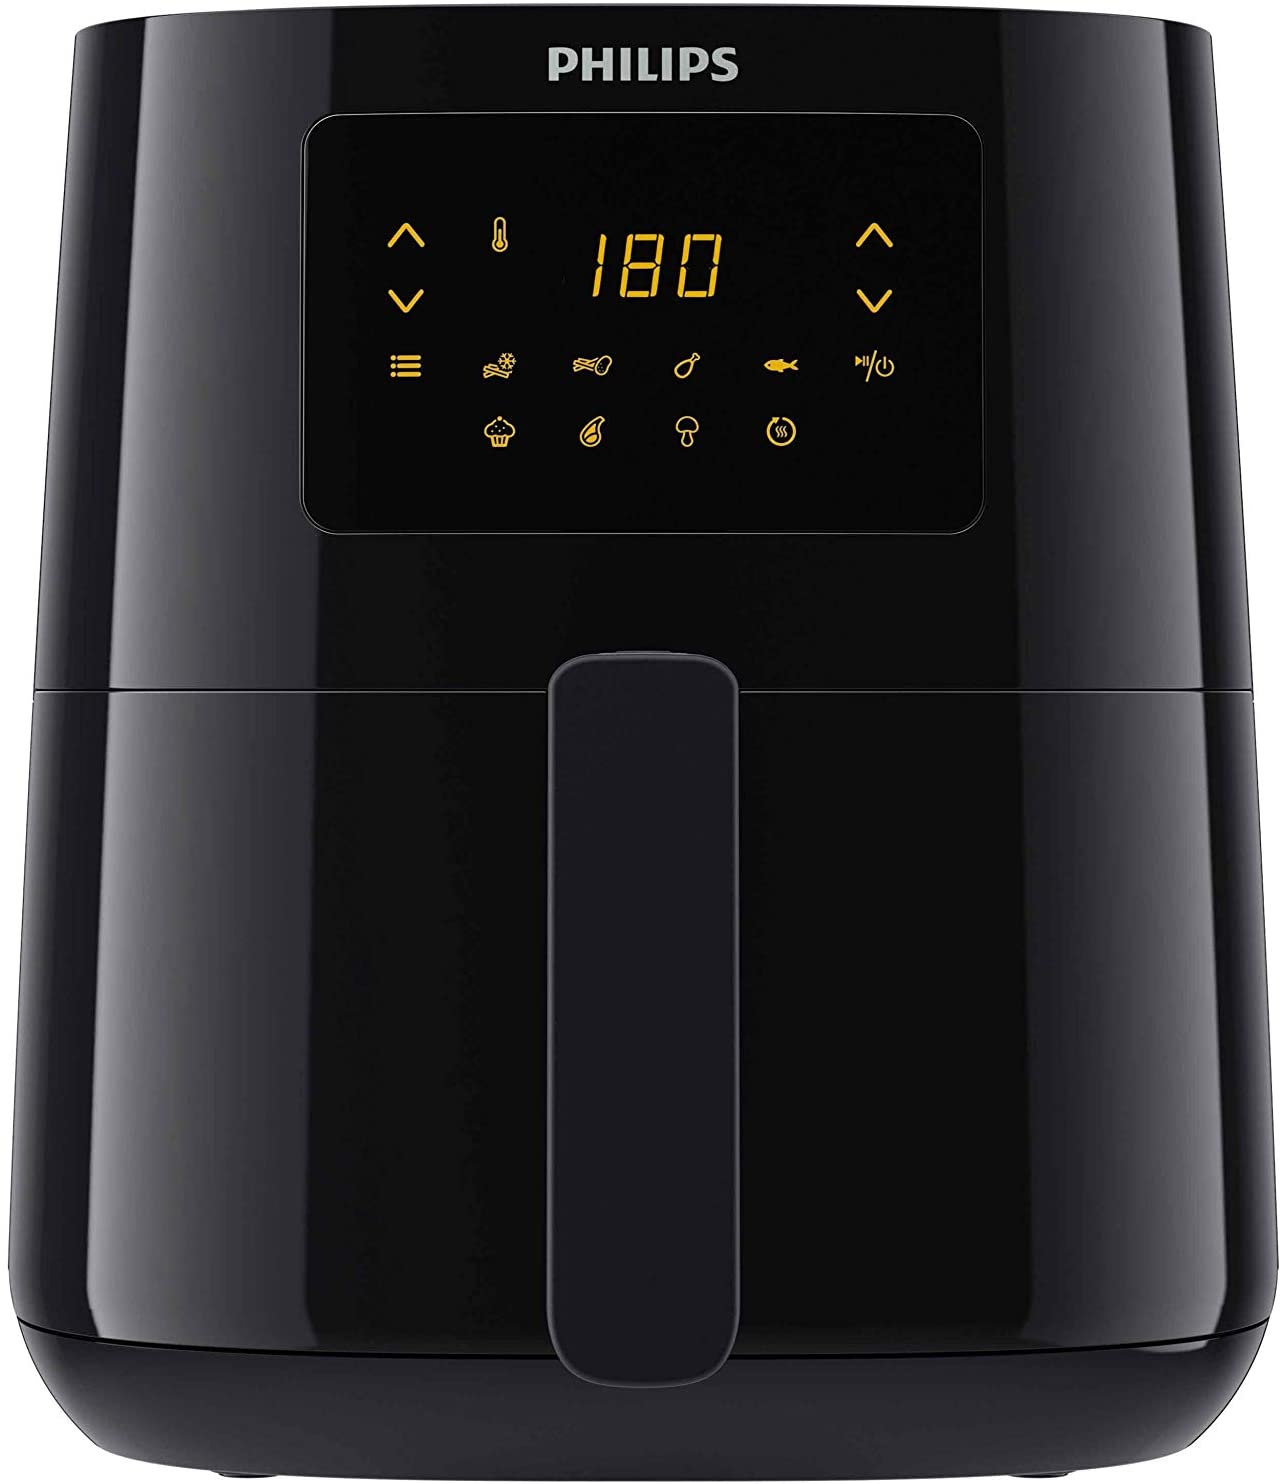 Philips Domestic Appliances Philips HD9252/90 Original Airfryer Hot Air Fryer 1400 W, for 2-3 People, 800 g/4.1 L, Digital Display, Black